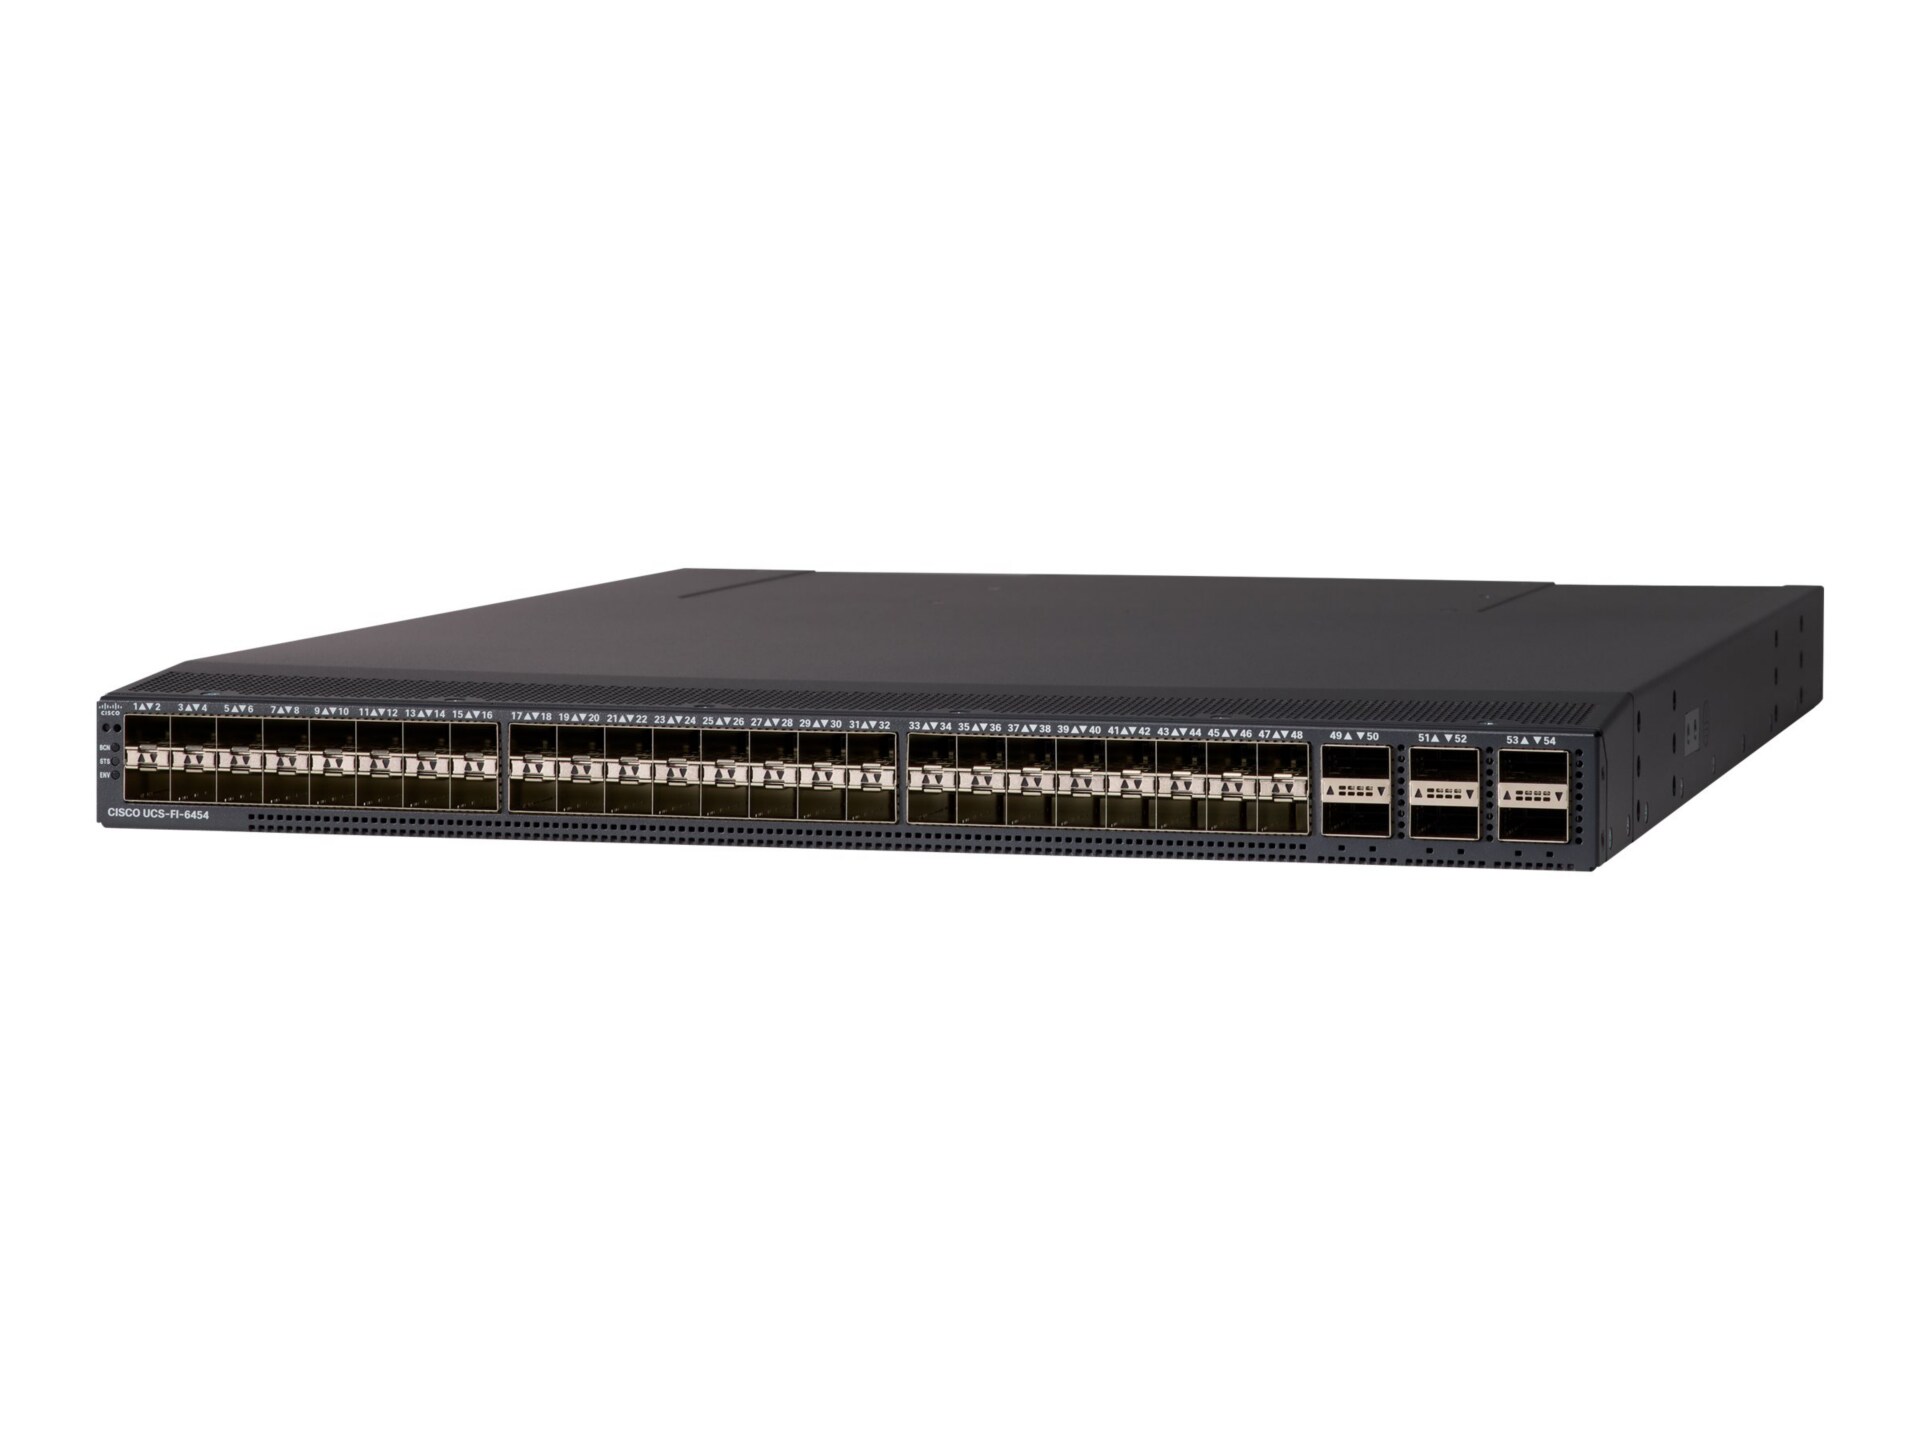 Cisco UCS 6454 Fabric Interconnect - switch - 54 ports - managed - rack-mou